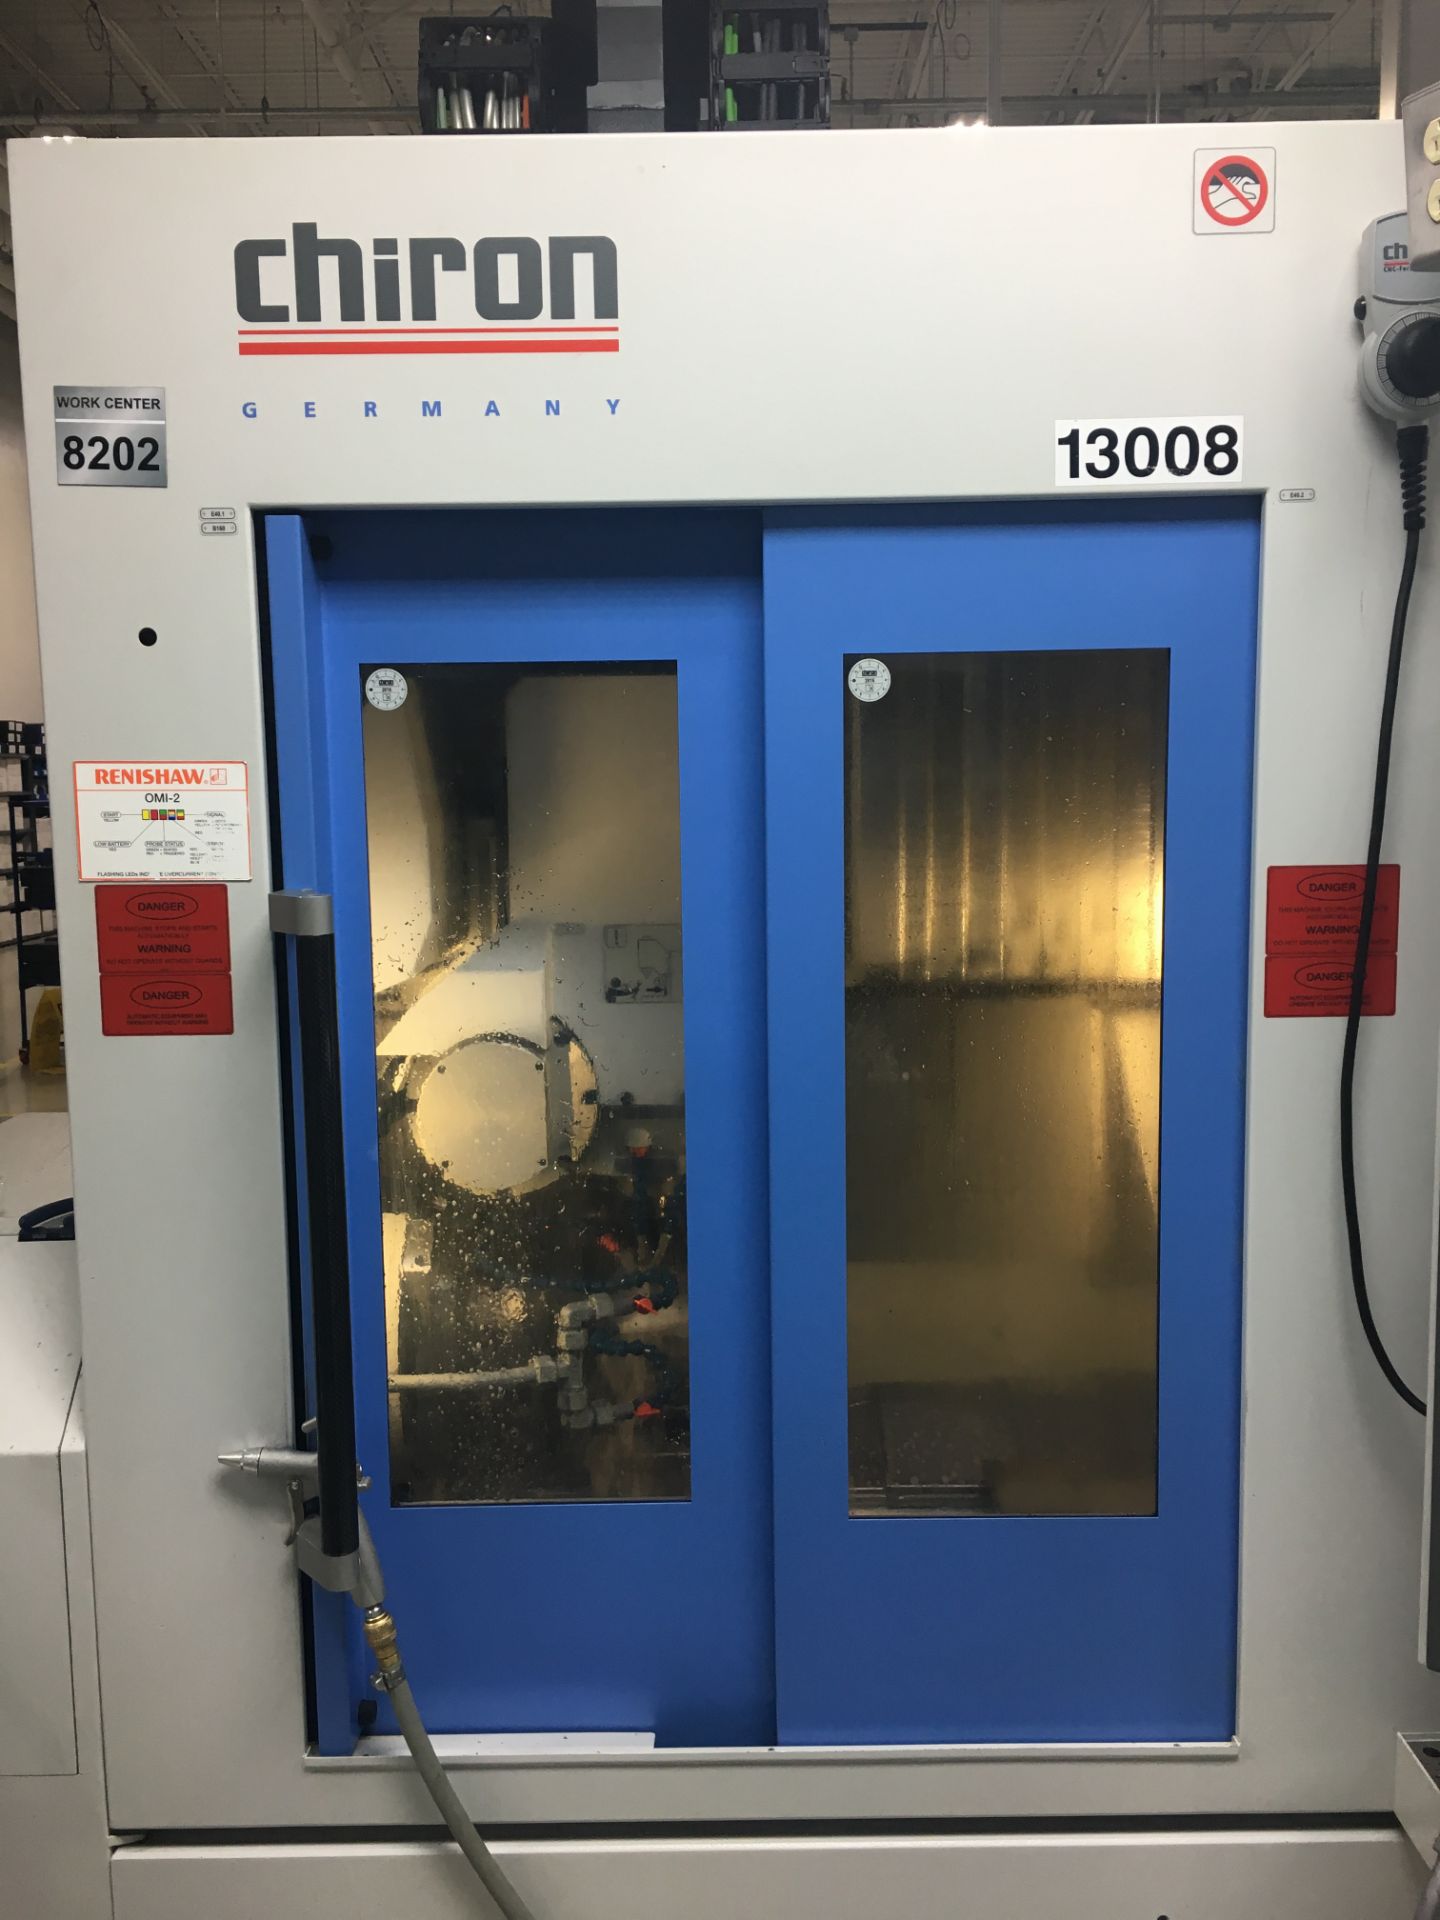 CHIRON FZ 12 MT 5 AXIS CNC MILLING & TURNING CNTR, YEAR 2014, LOCATION TN - Image 2 of 7